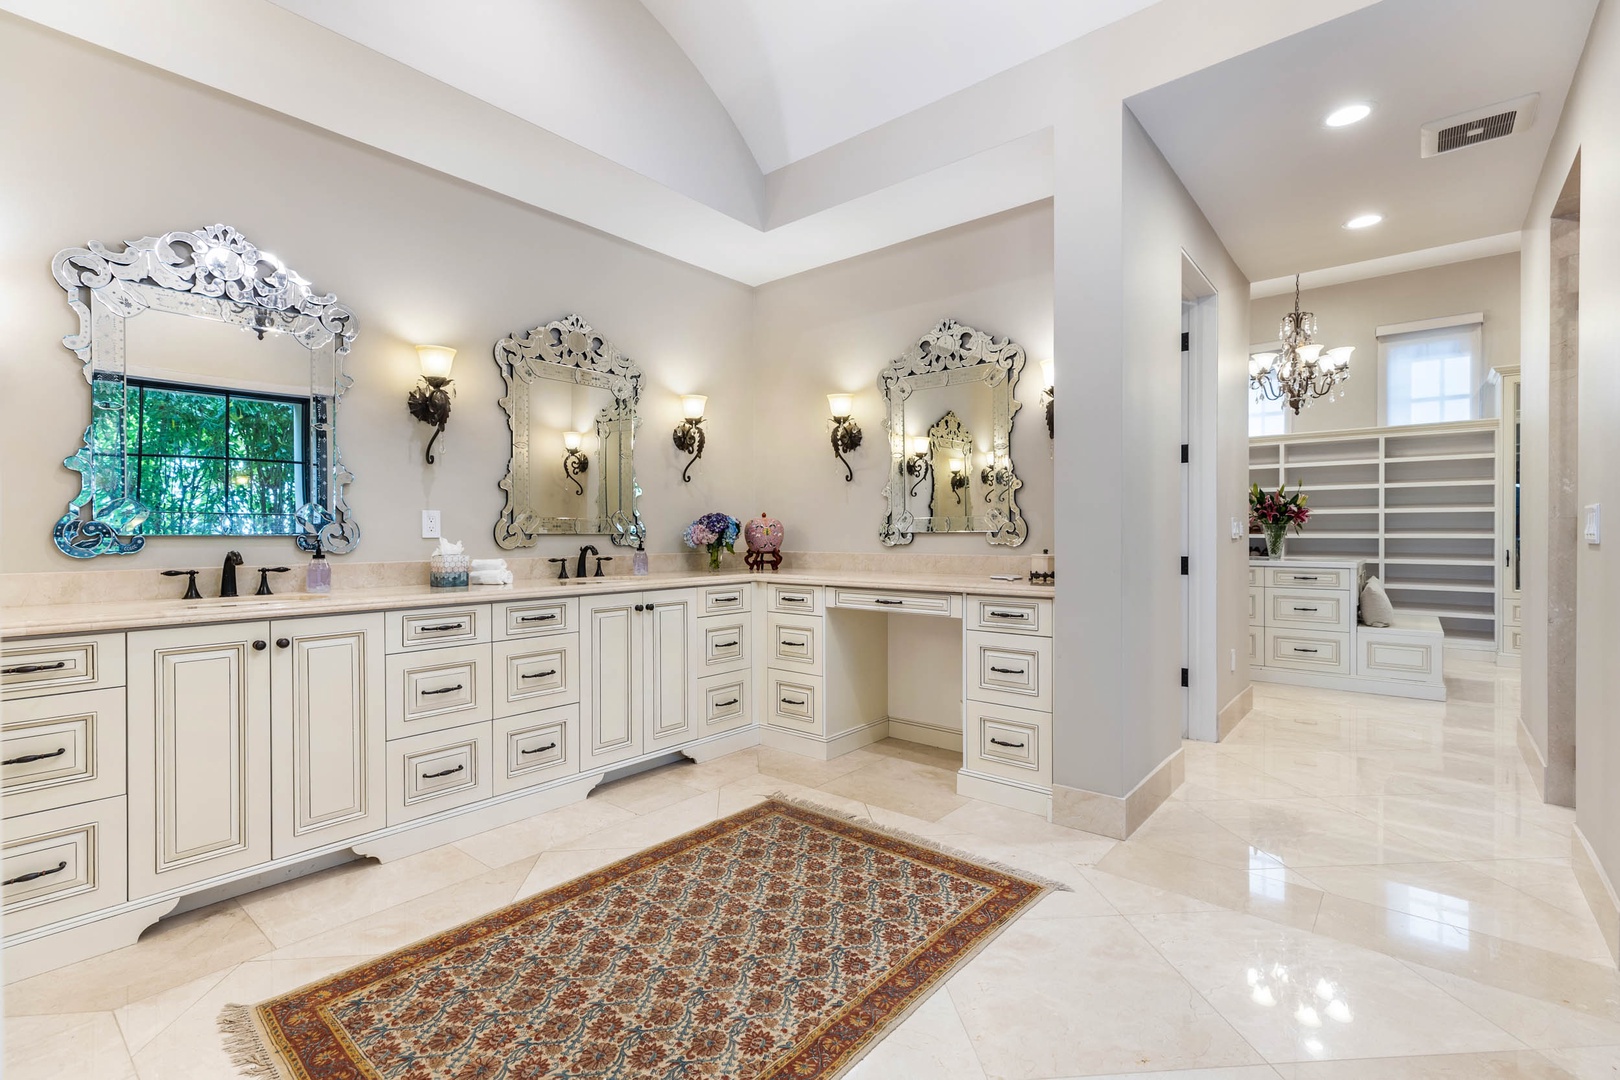 Honolulu Vacation Rentals, Royal Kahala Estate - The ensuite is pure luxury, with bright and spacious space.